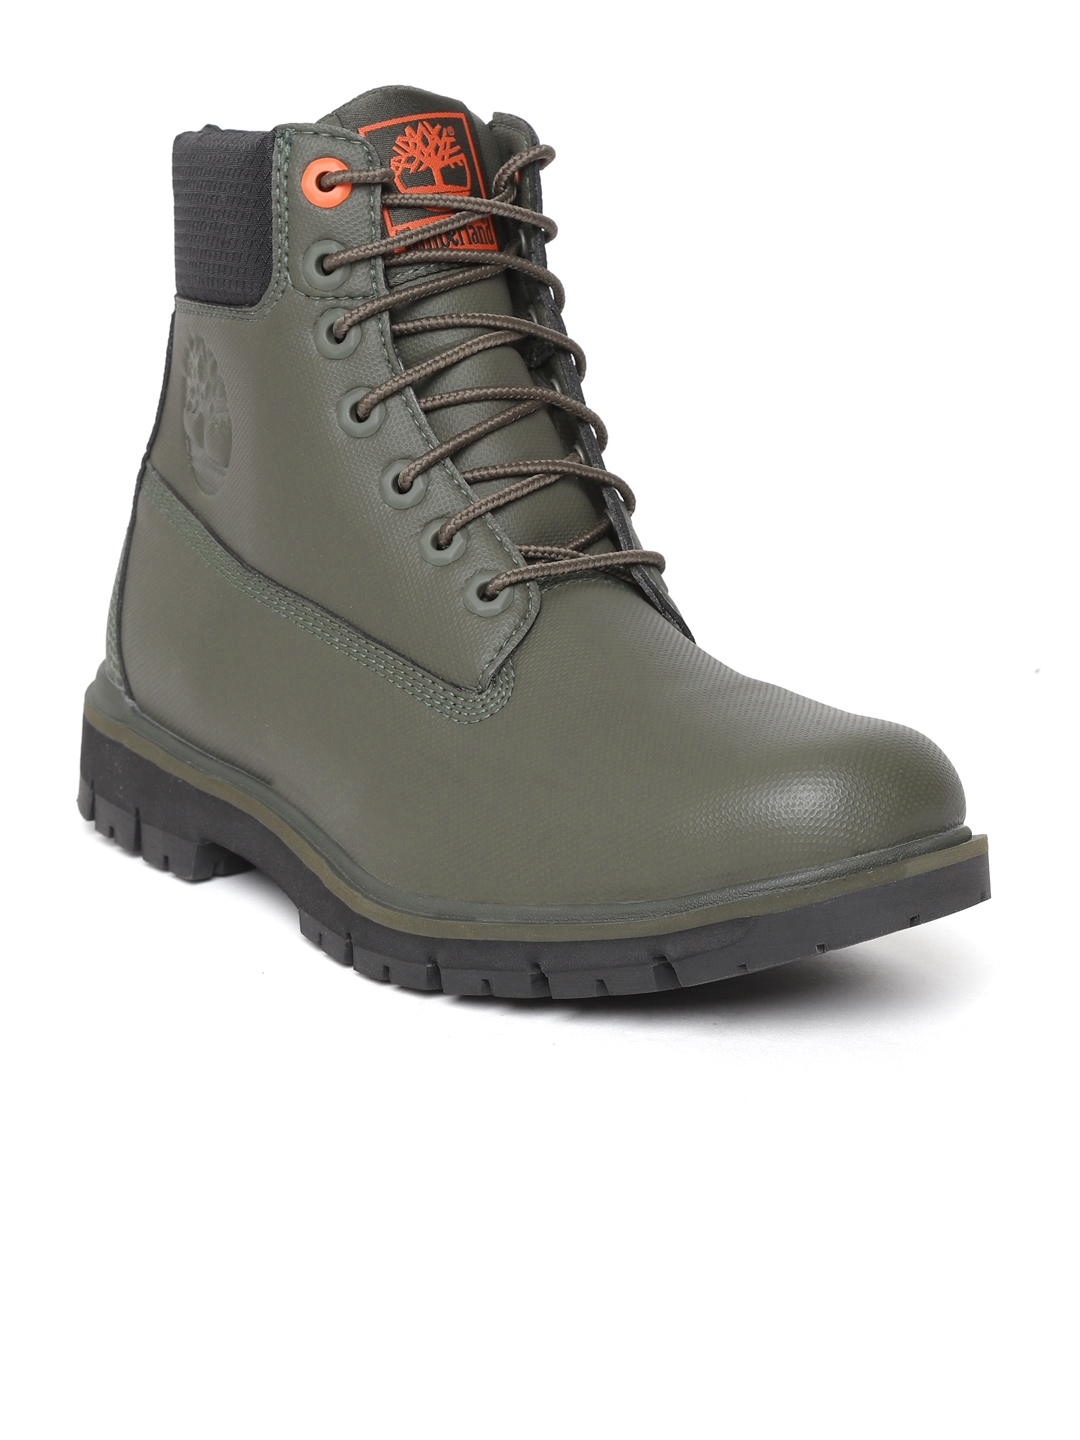 mens timberland boots olive green